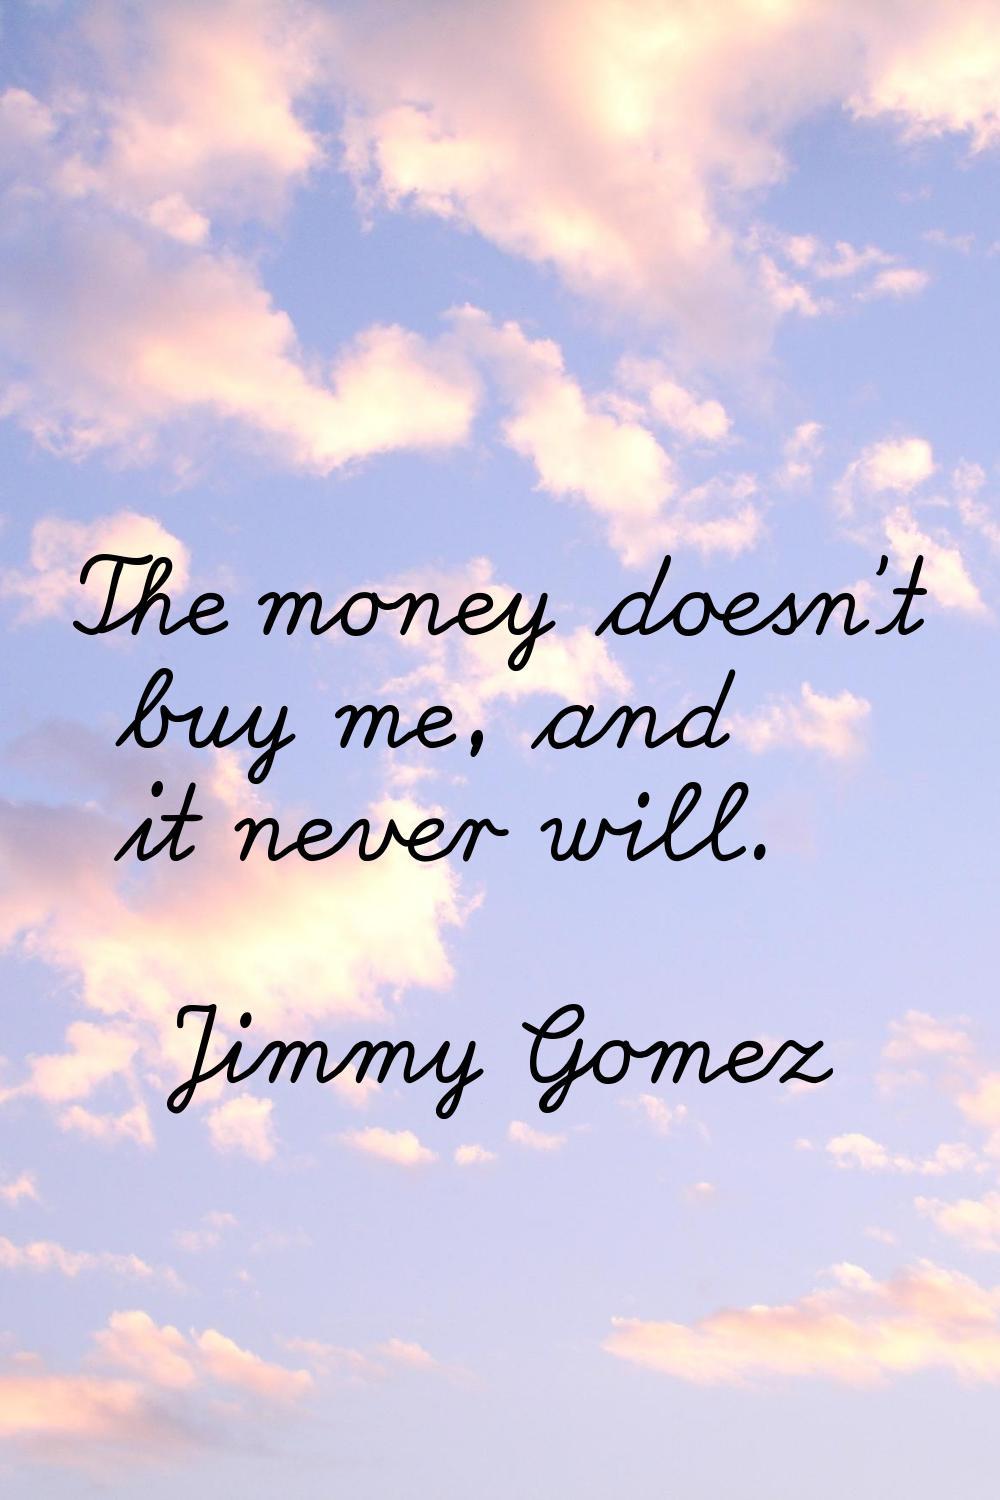 The money doesn't buy me, and it never will.